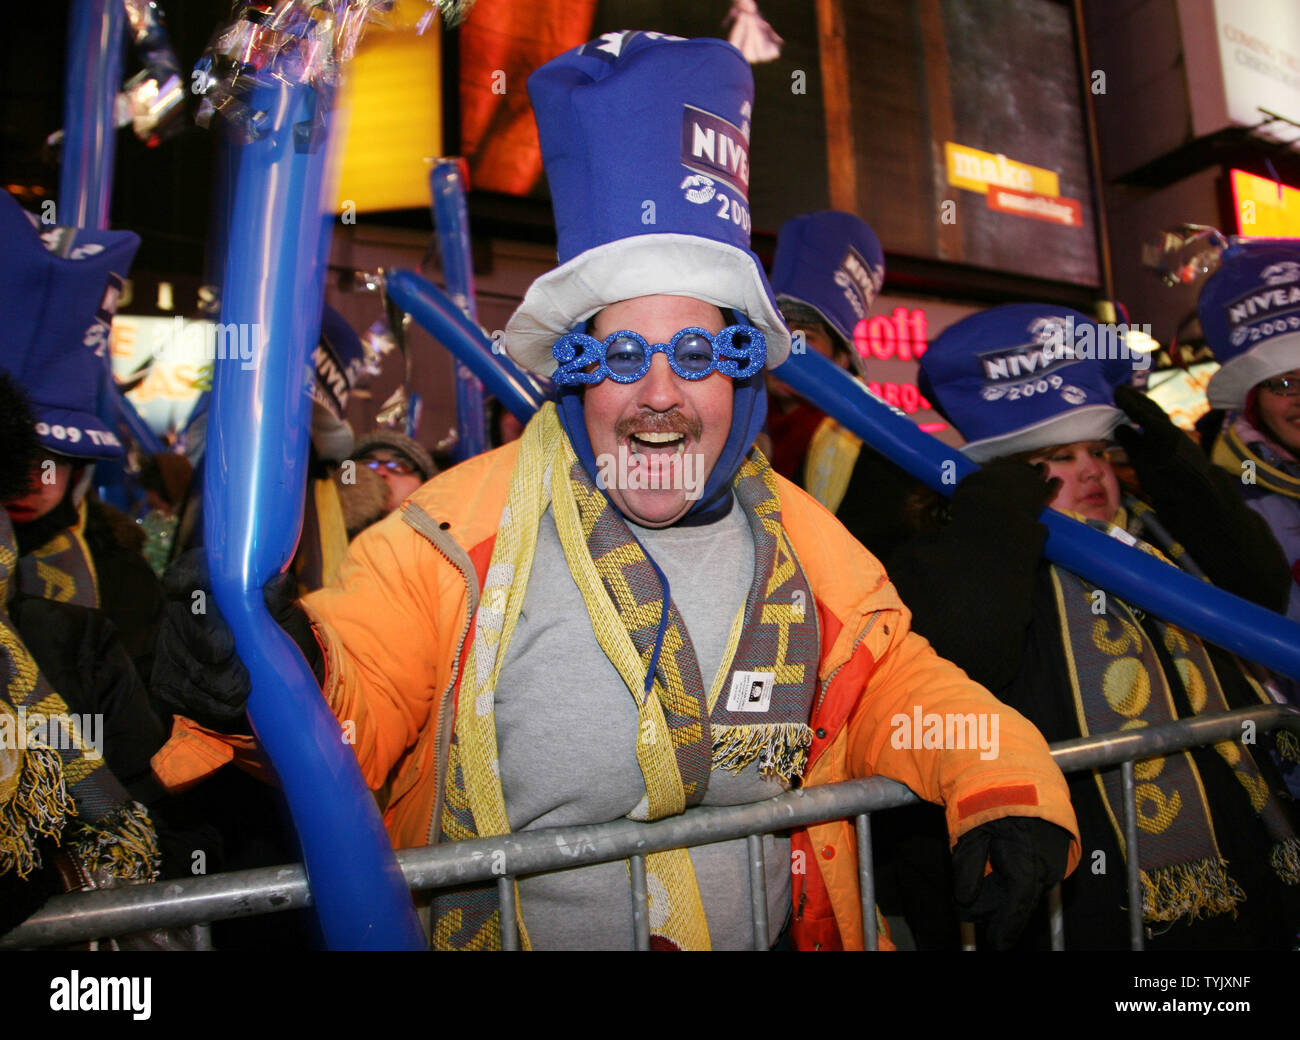 Greg Packer joins the hundreds of thousands of revelers gathered in Times Square in sub-freezing temperatures as they celebrate New Year's Eve on December 31, 2008 in New York City. (UPI Photo/Monika Graff) Stock Photo